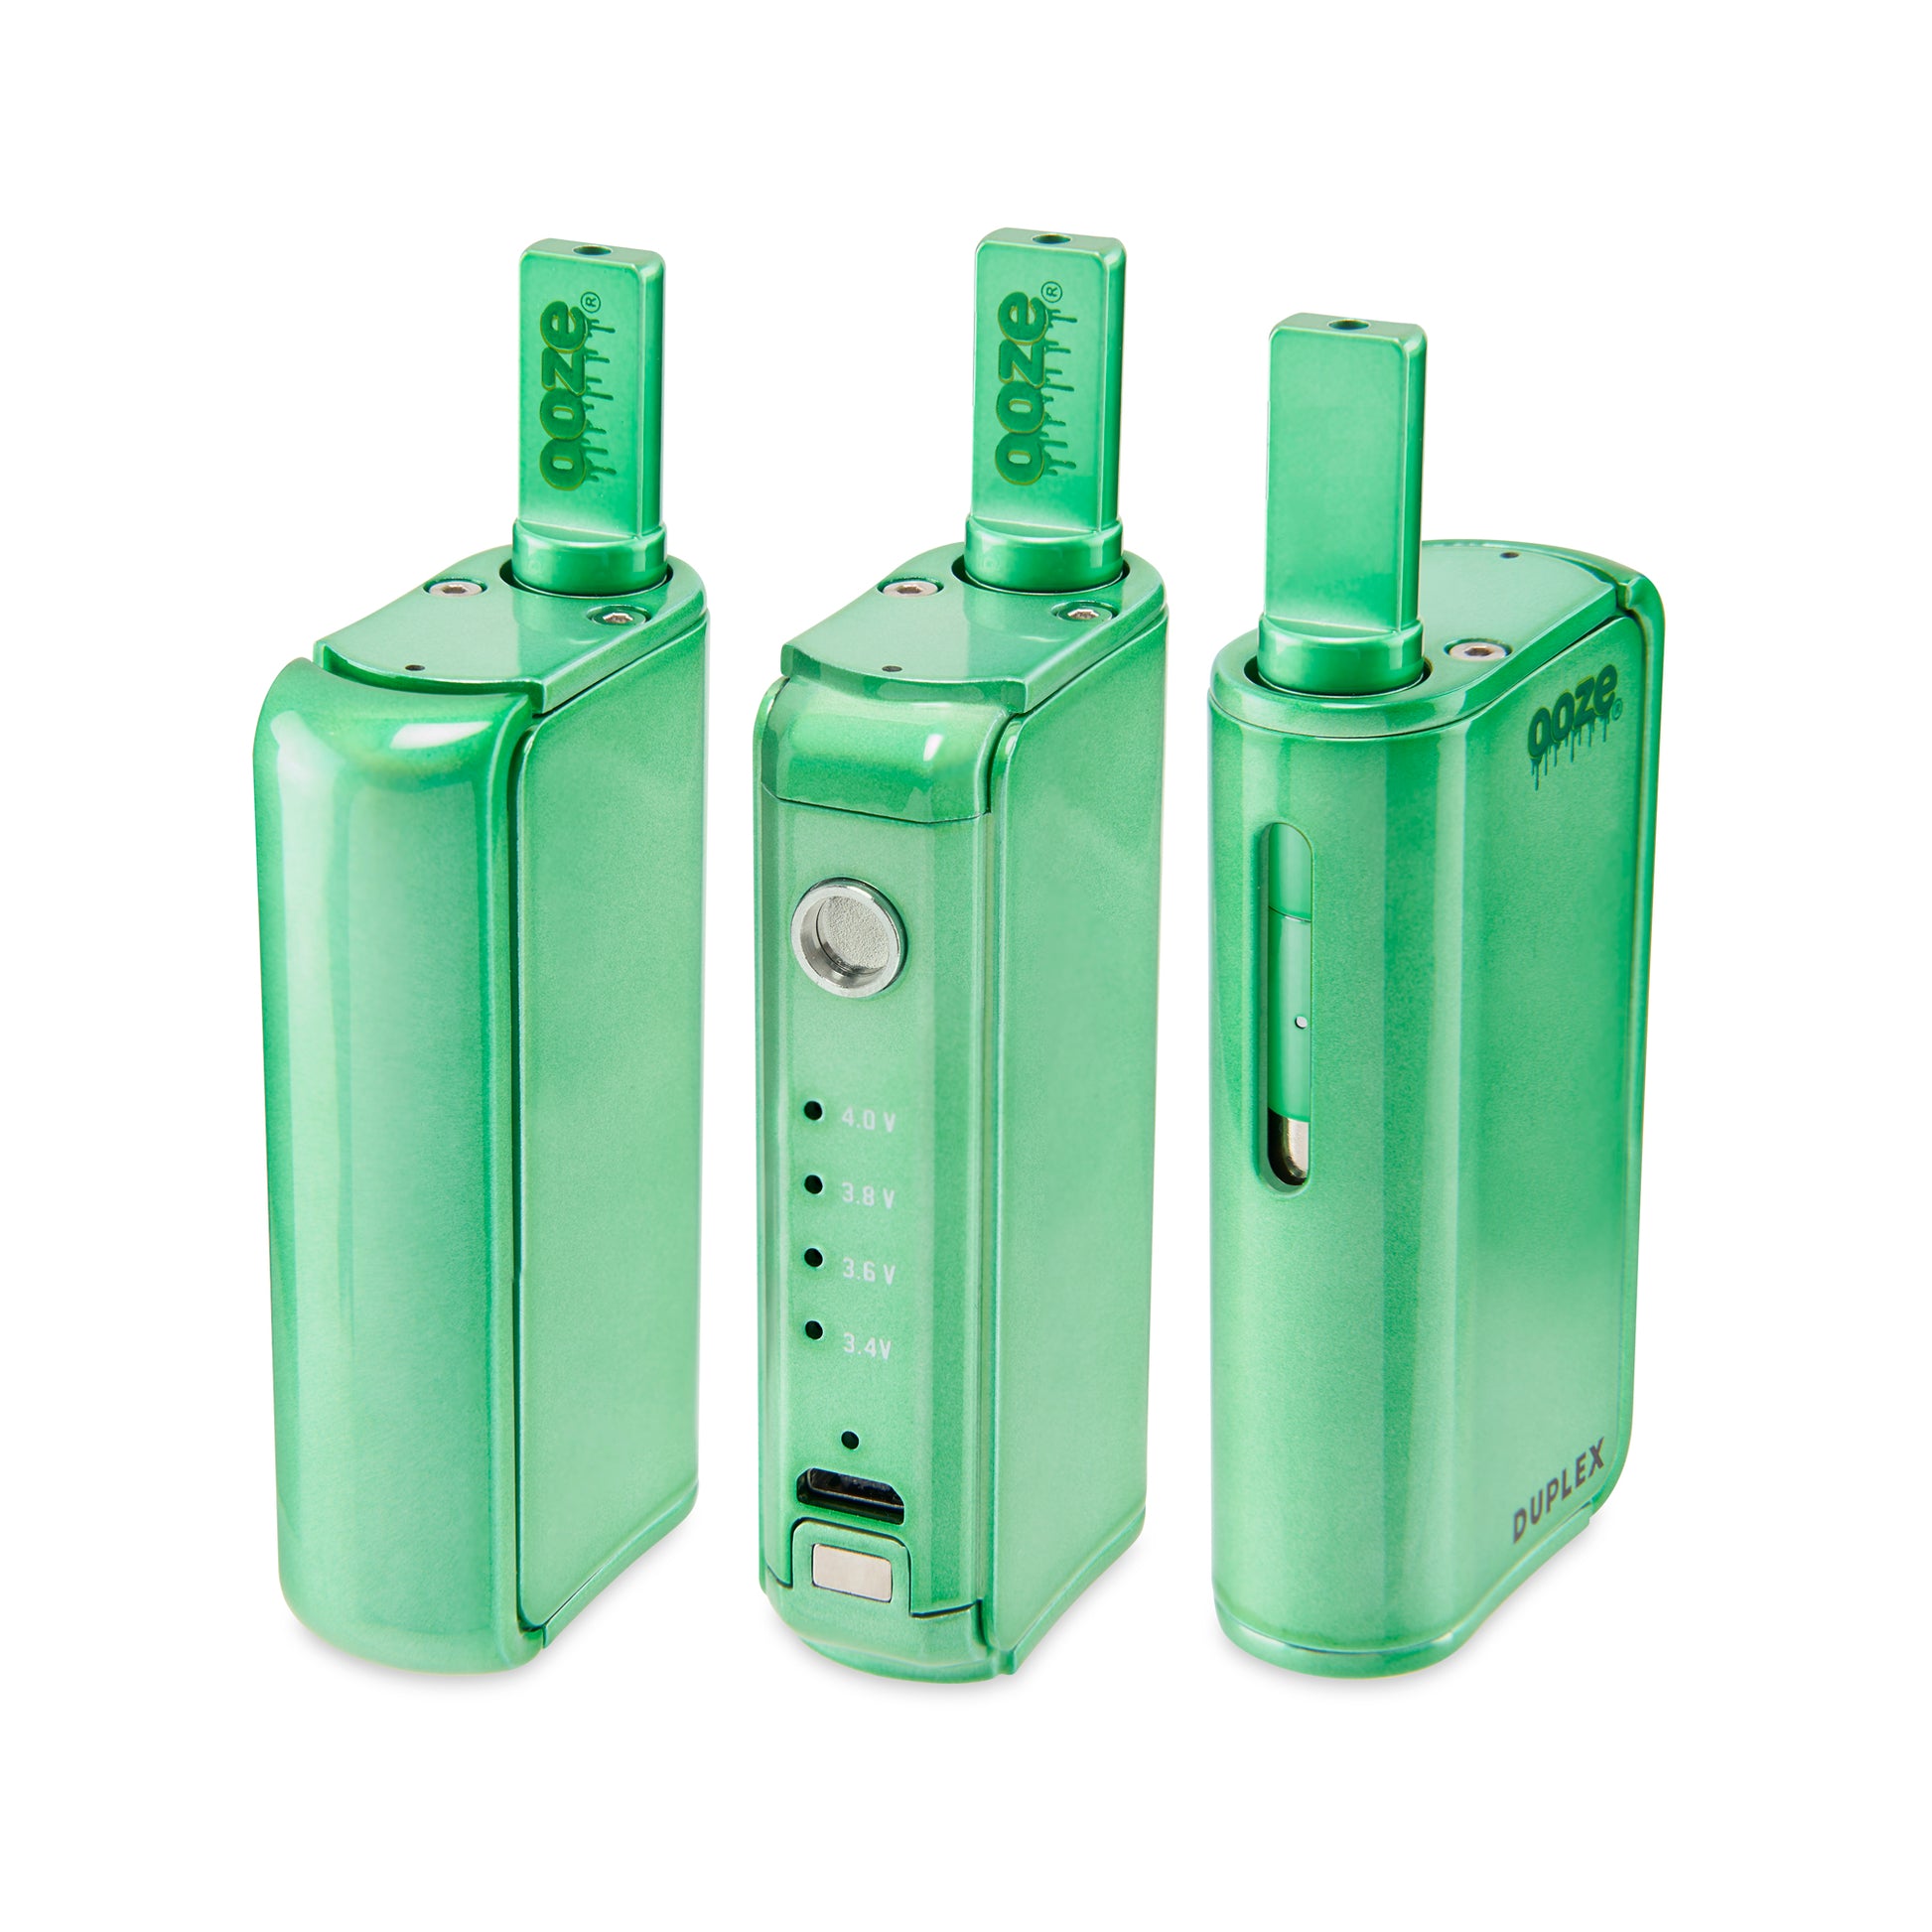 Three of The Mary Jade Ooze Duplex Pro Vaporizers are in a line. The right has the magnetic button attached, the middle has it off, and the right shows the opposite side of the device.